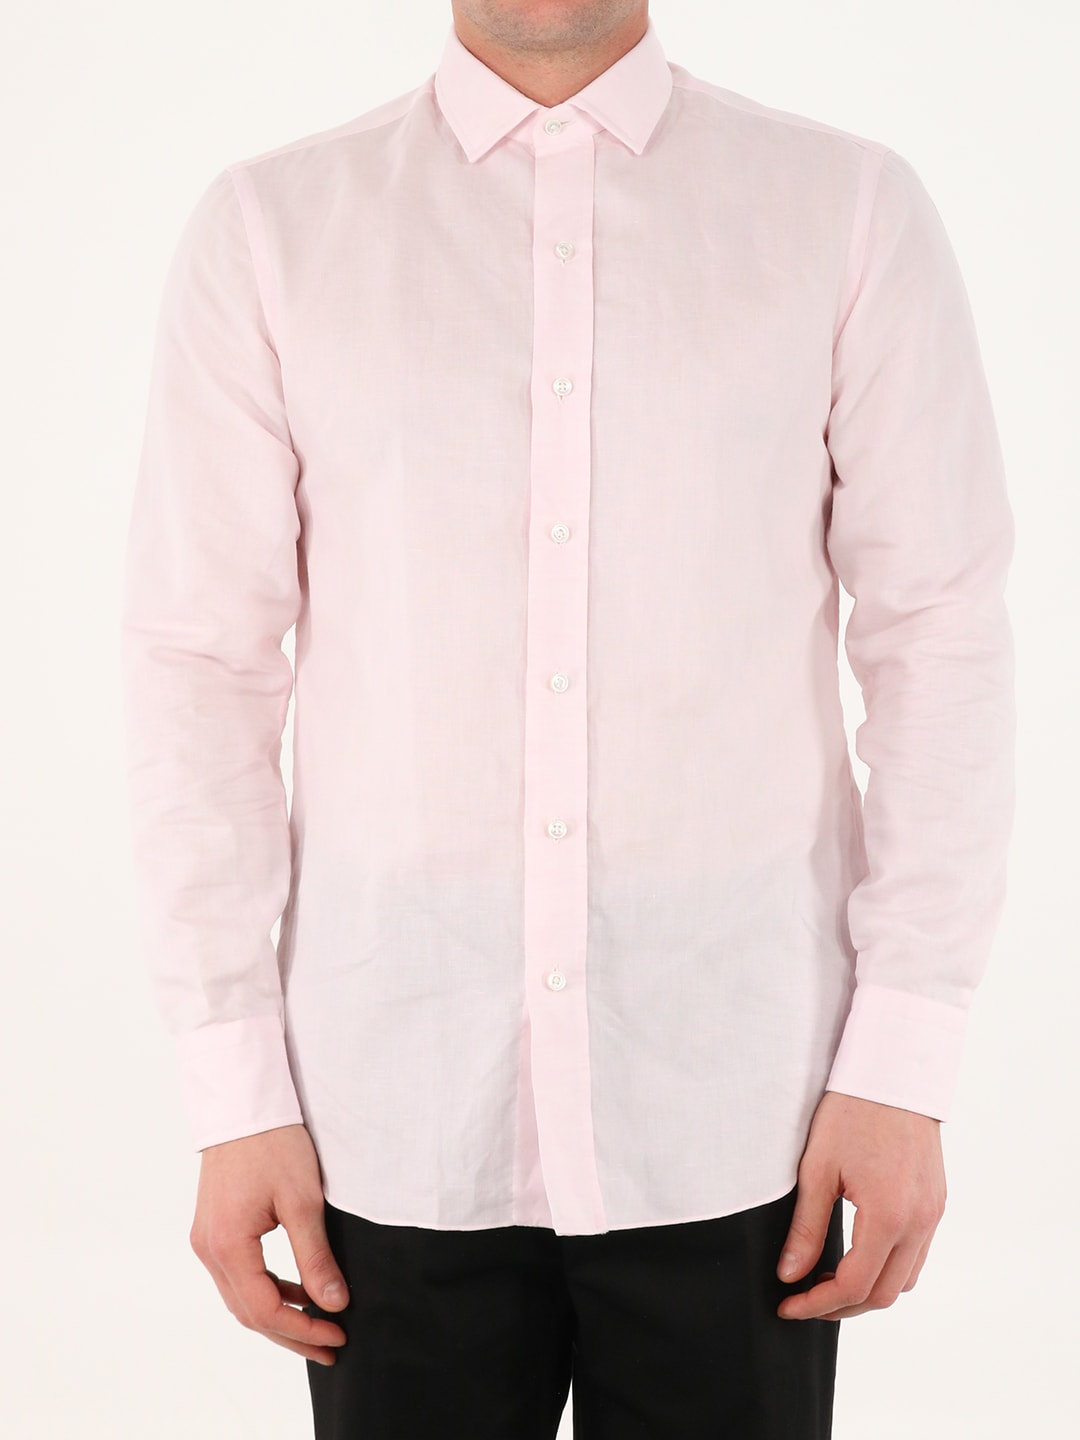 Pink Shirt With Open Collar